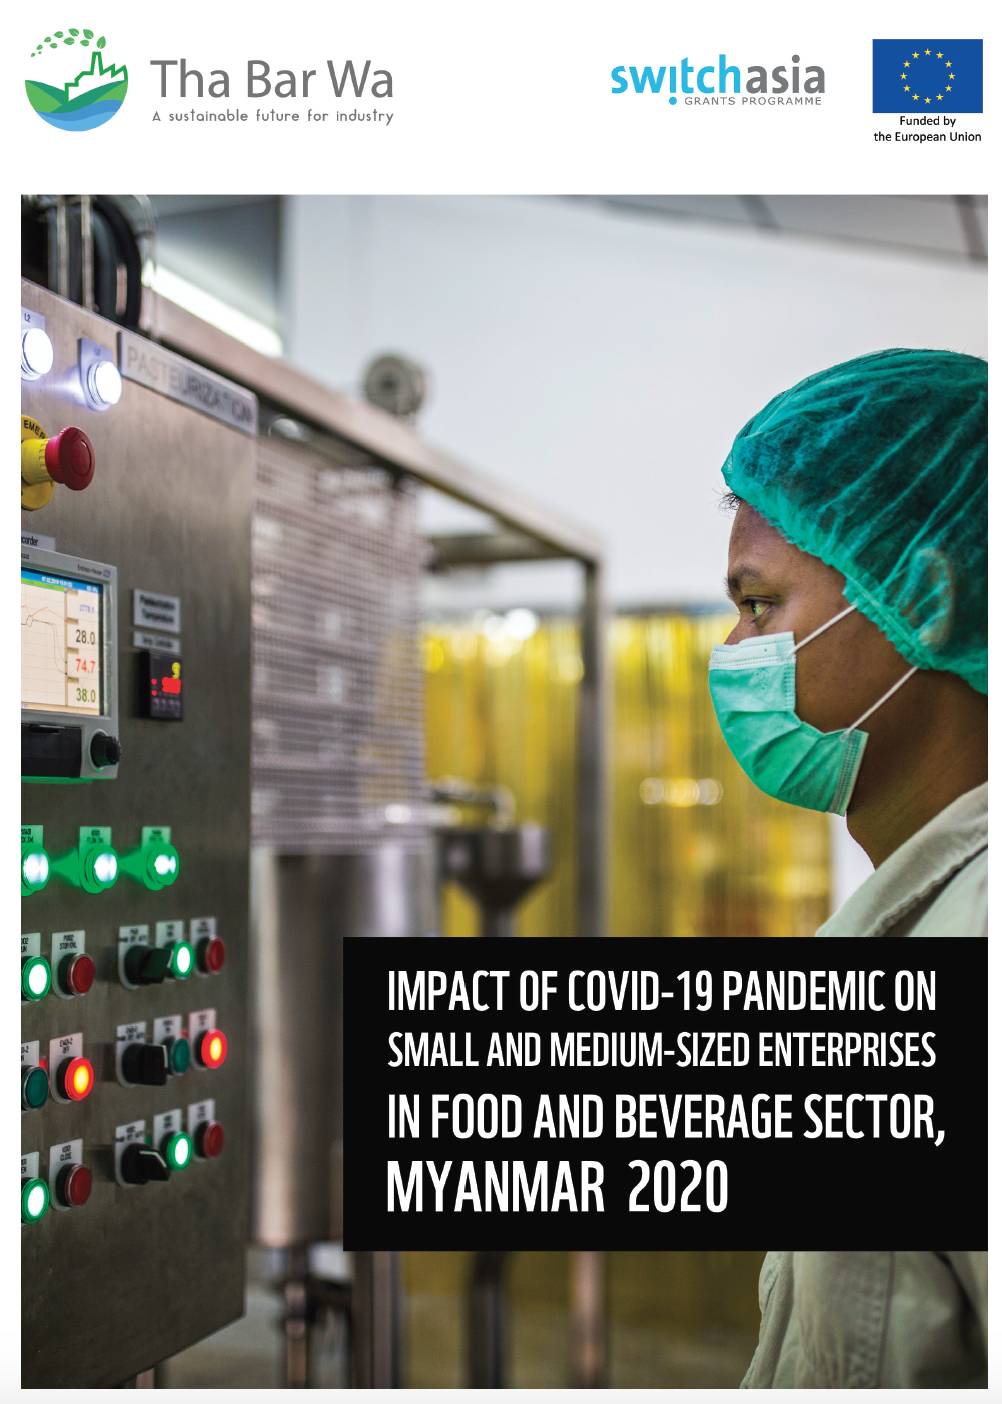 Impact of COVID-19 Pandemic on SMEs in Food and Beverage Sector Myanmar 2020